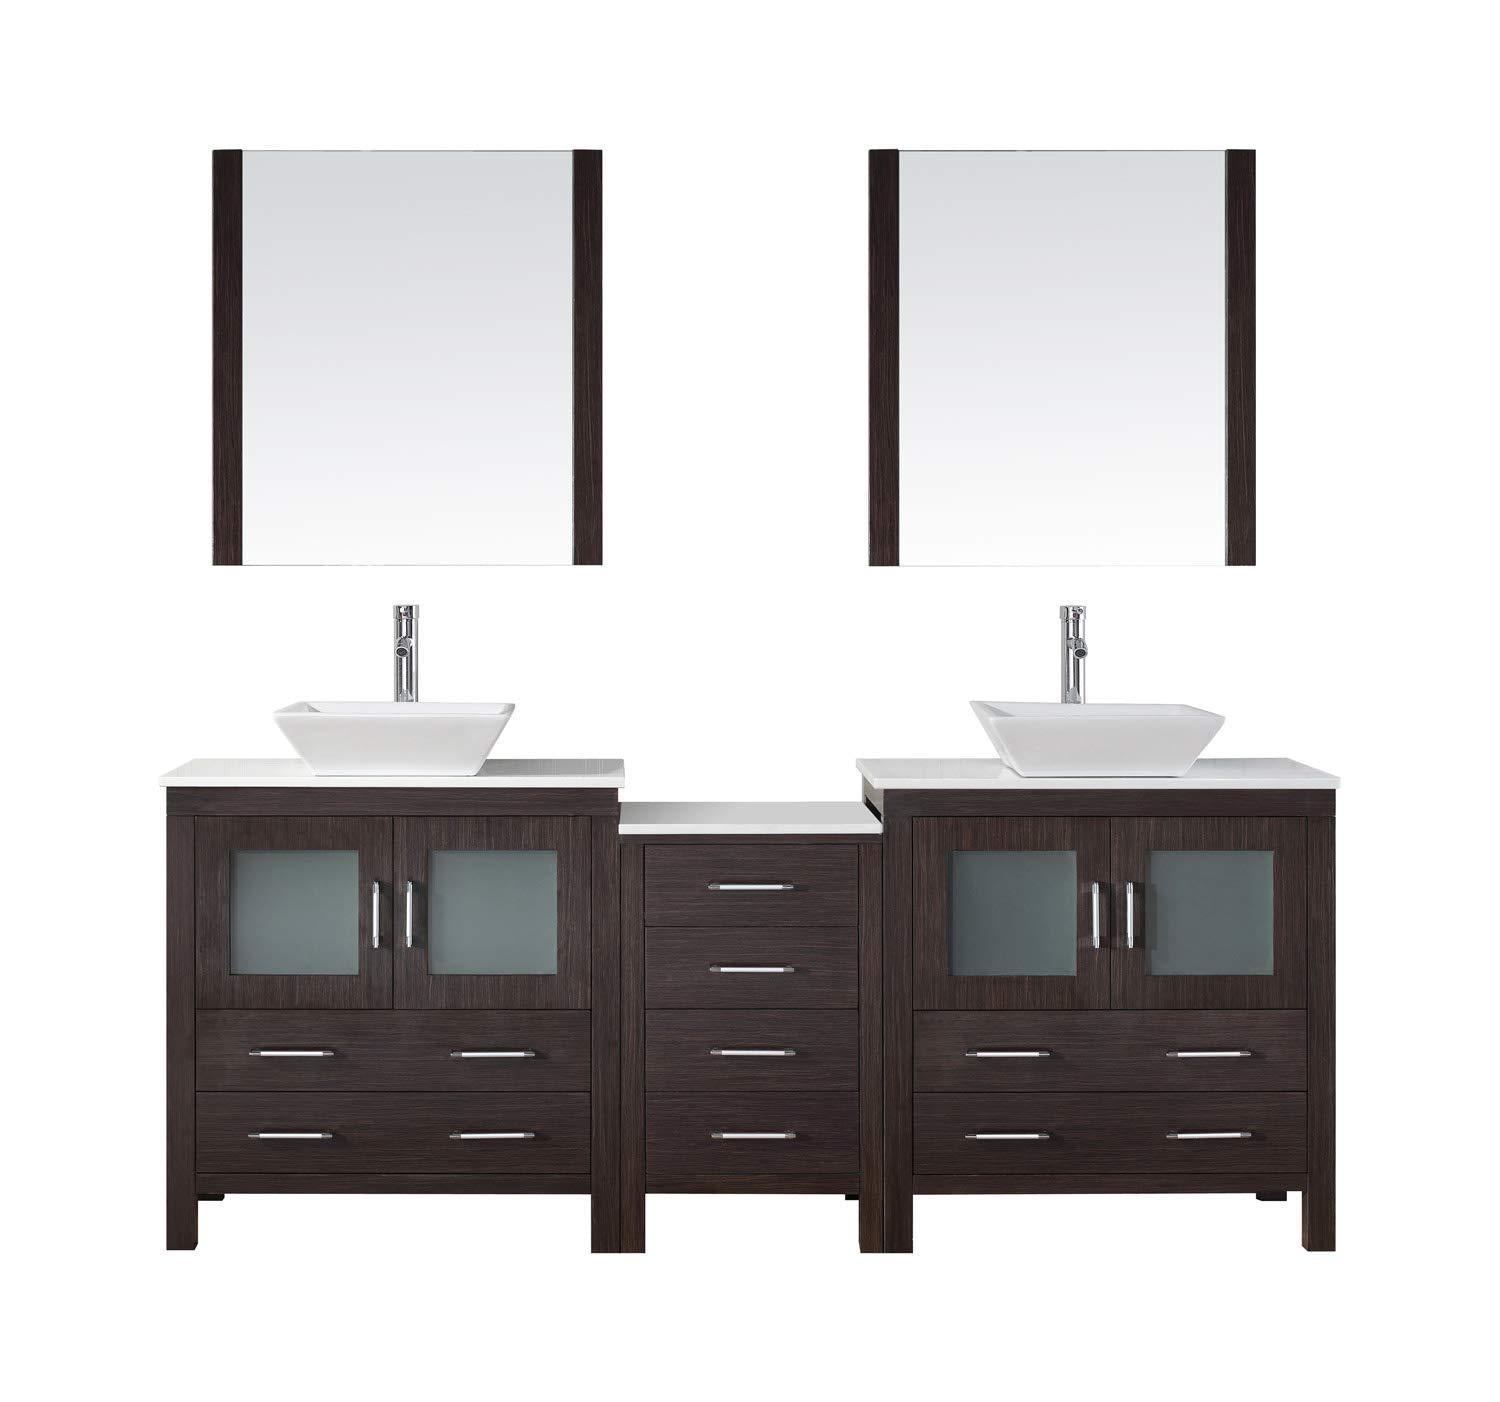 New virtu usa dior 82 inch double sink bathroom vanity set in espresso w square vessel sink white engineered stone countertop single hole polished chrome 2 mirrors kd 70082 s es